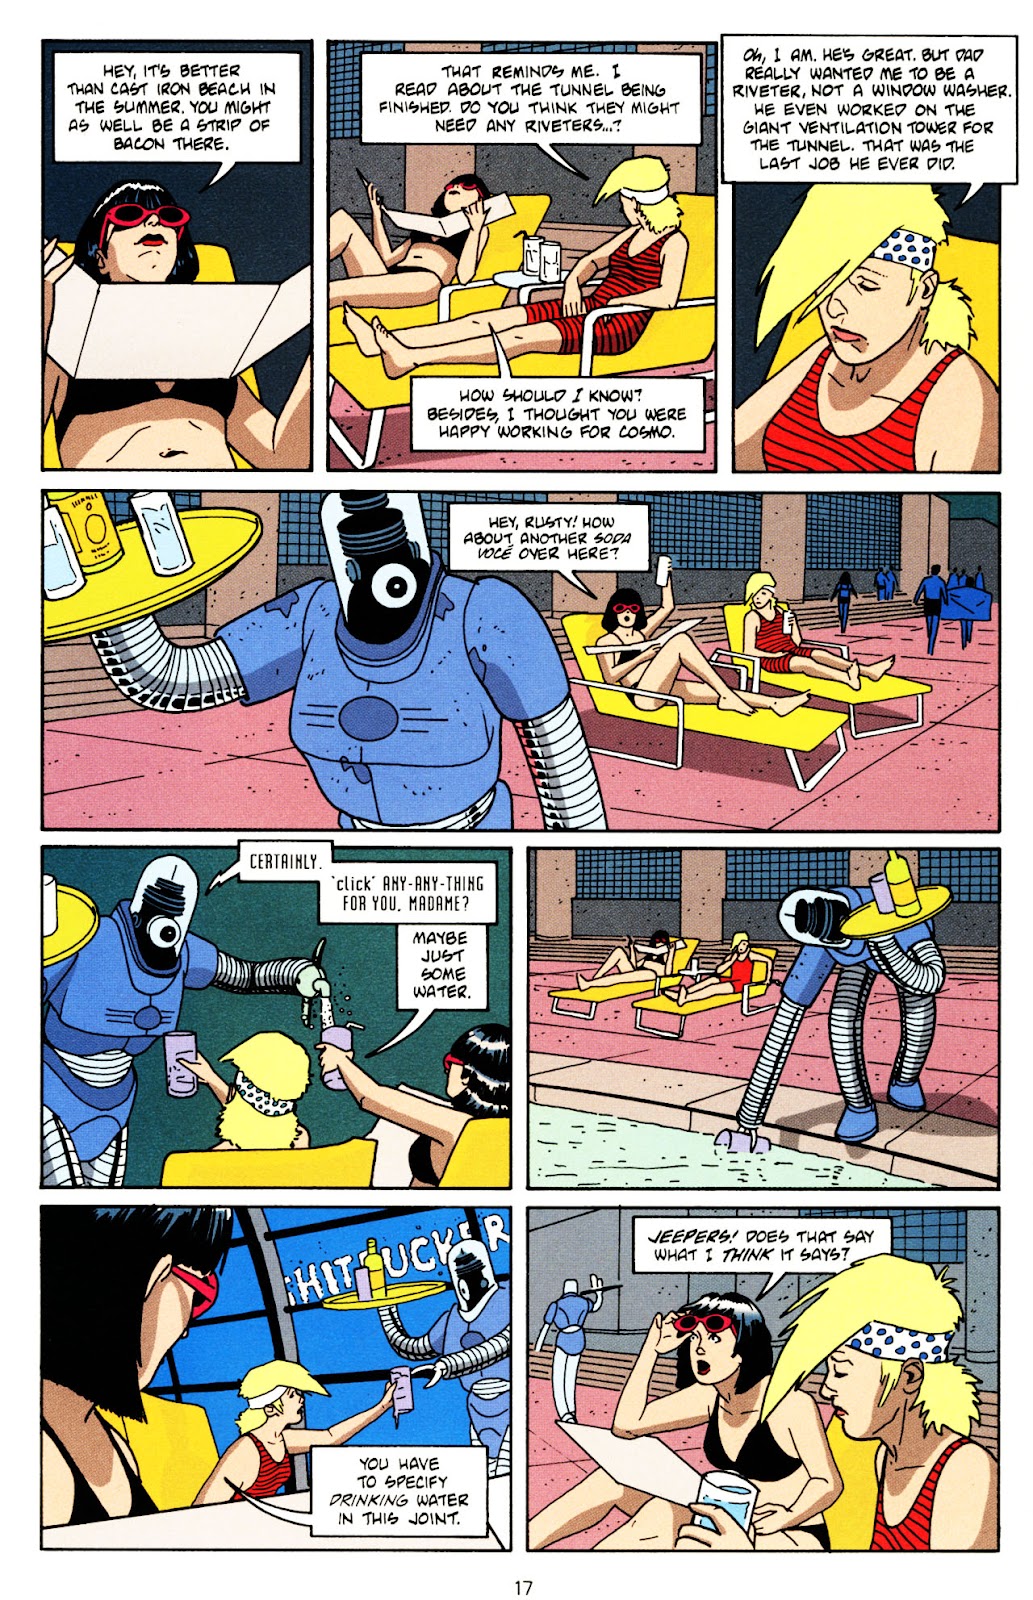 Terminal City: Aerial Graffiti issue 1 - Page 18